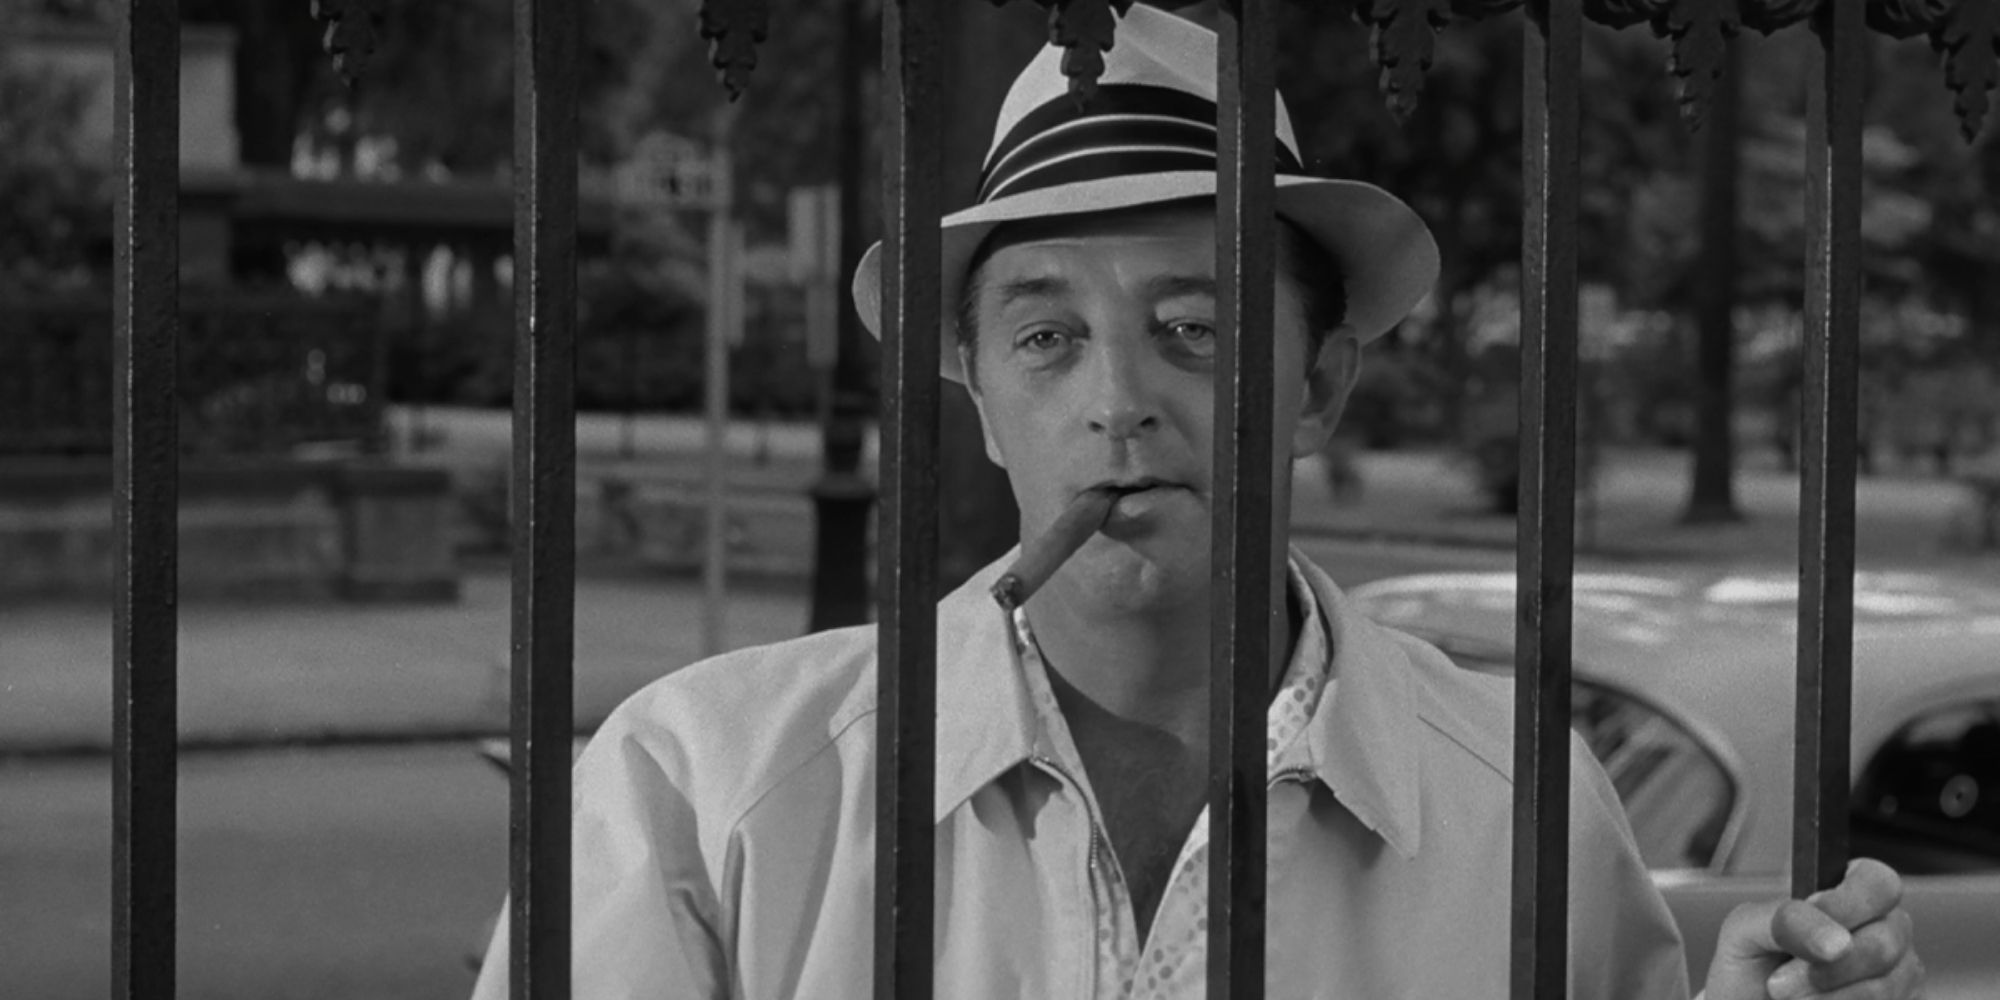 The villainous Max Cady in "Cape Fear" stares at his target from behind bars